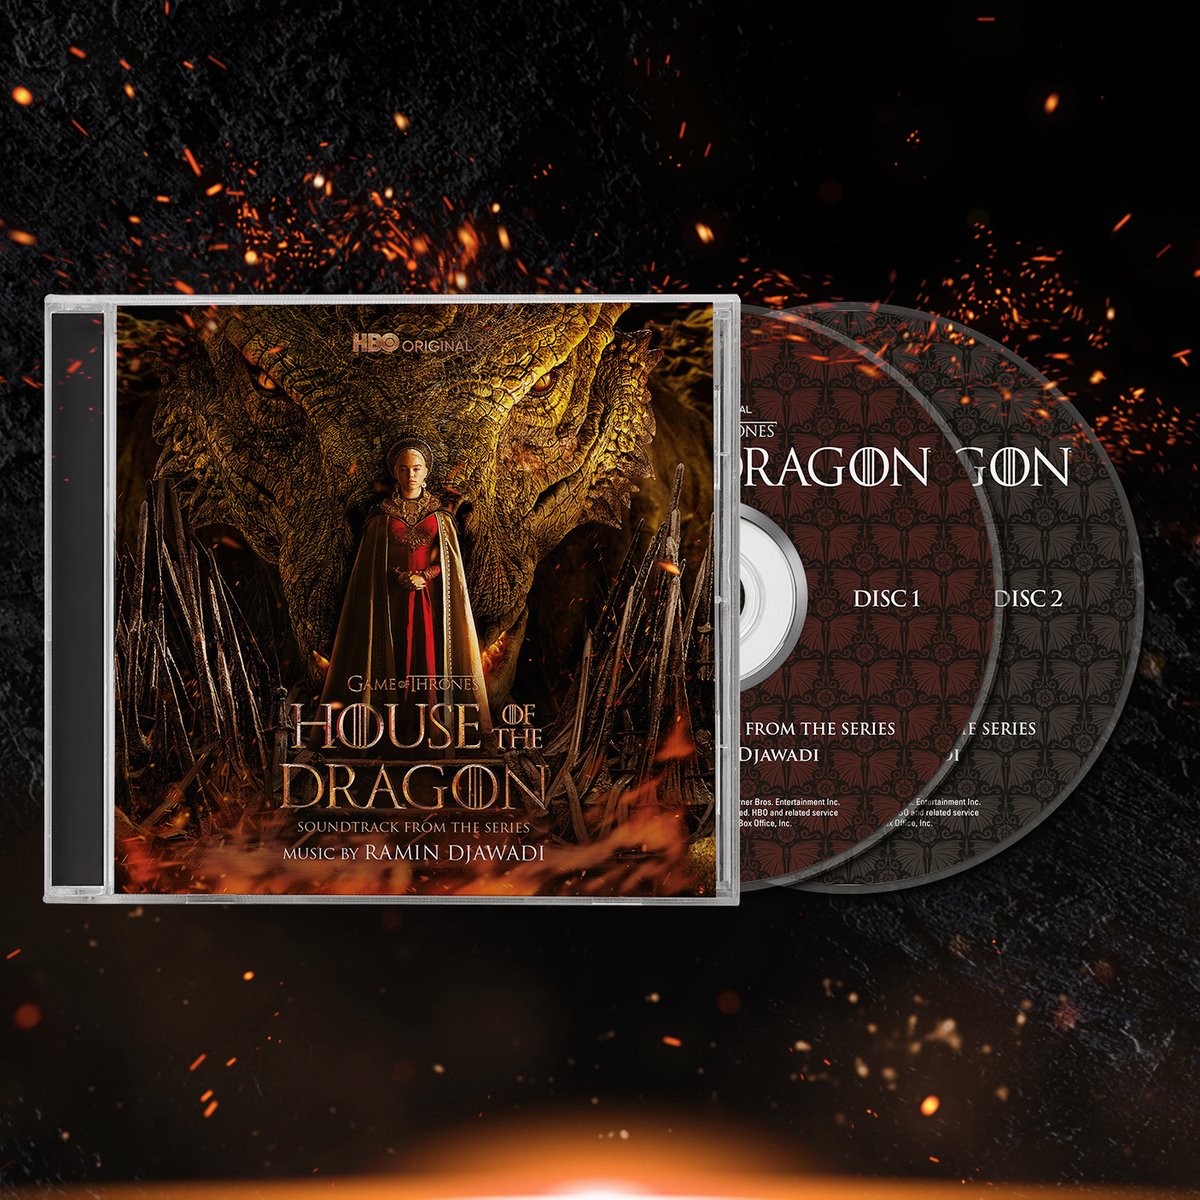 Pre-order the exclusive double CD jewel case of @HouseofDragon: Season 1 by @Djawadi_Ramin, renowned for @GameOfThrones and @WestworldHBO. Featuring 44 tracks, this collector's gem captures the musical brilliance of House of the Dragon's epic world. 🐉 bitly.ws/ZWCJ